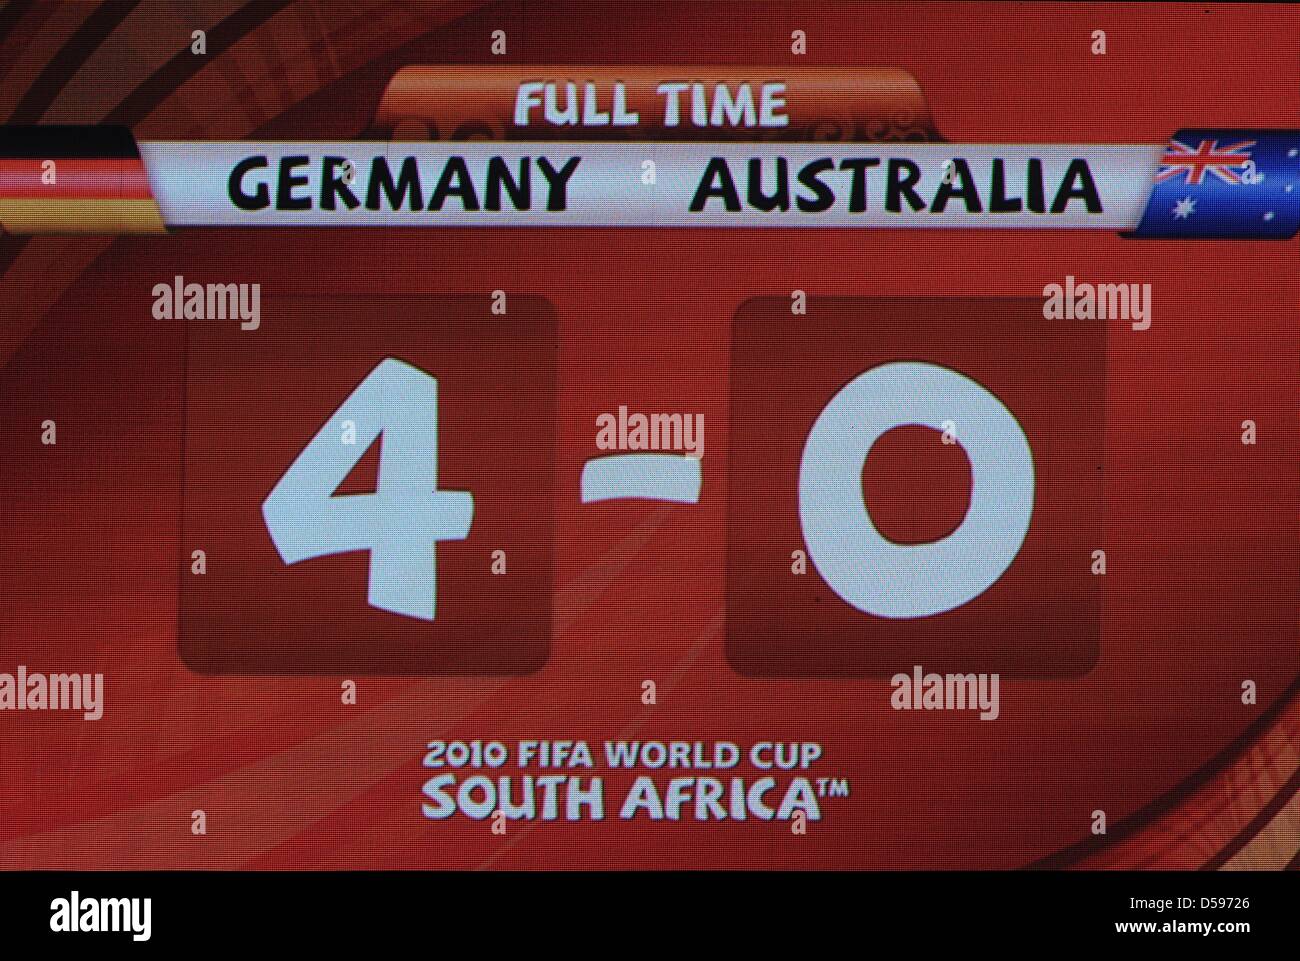 The scoreboard shows the match result after the 2010 FIFA World Cup group D match between Germany and Australia at Durban Stadium in Durban, South Africa 13 June 2010